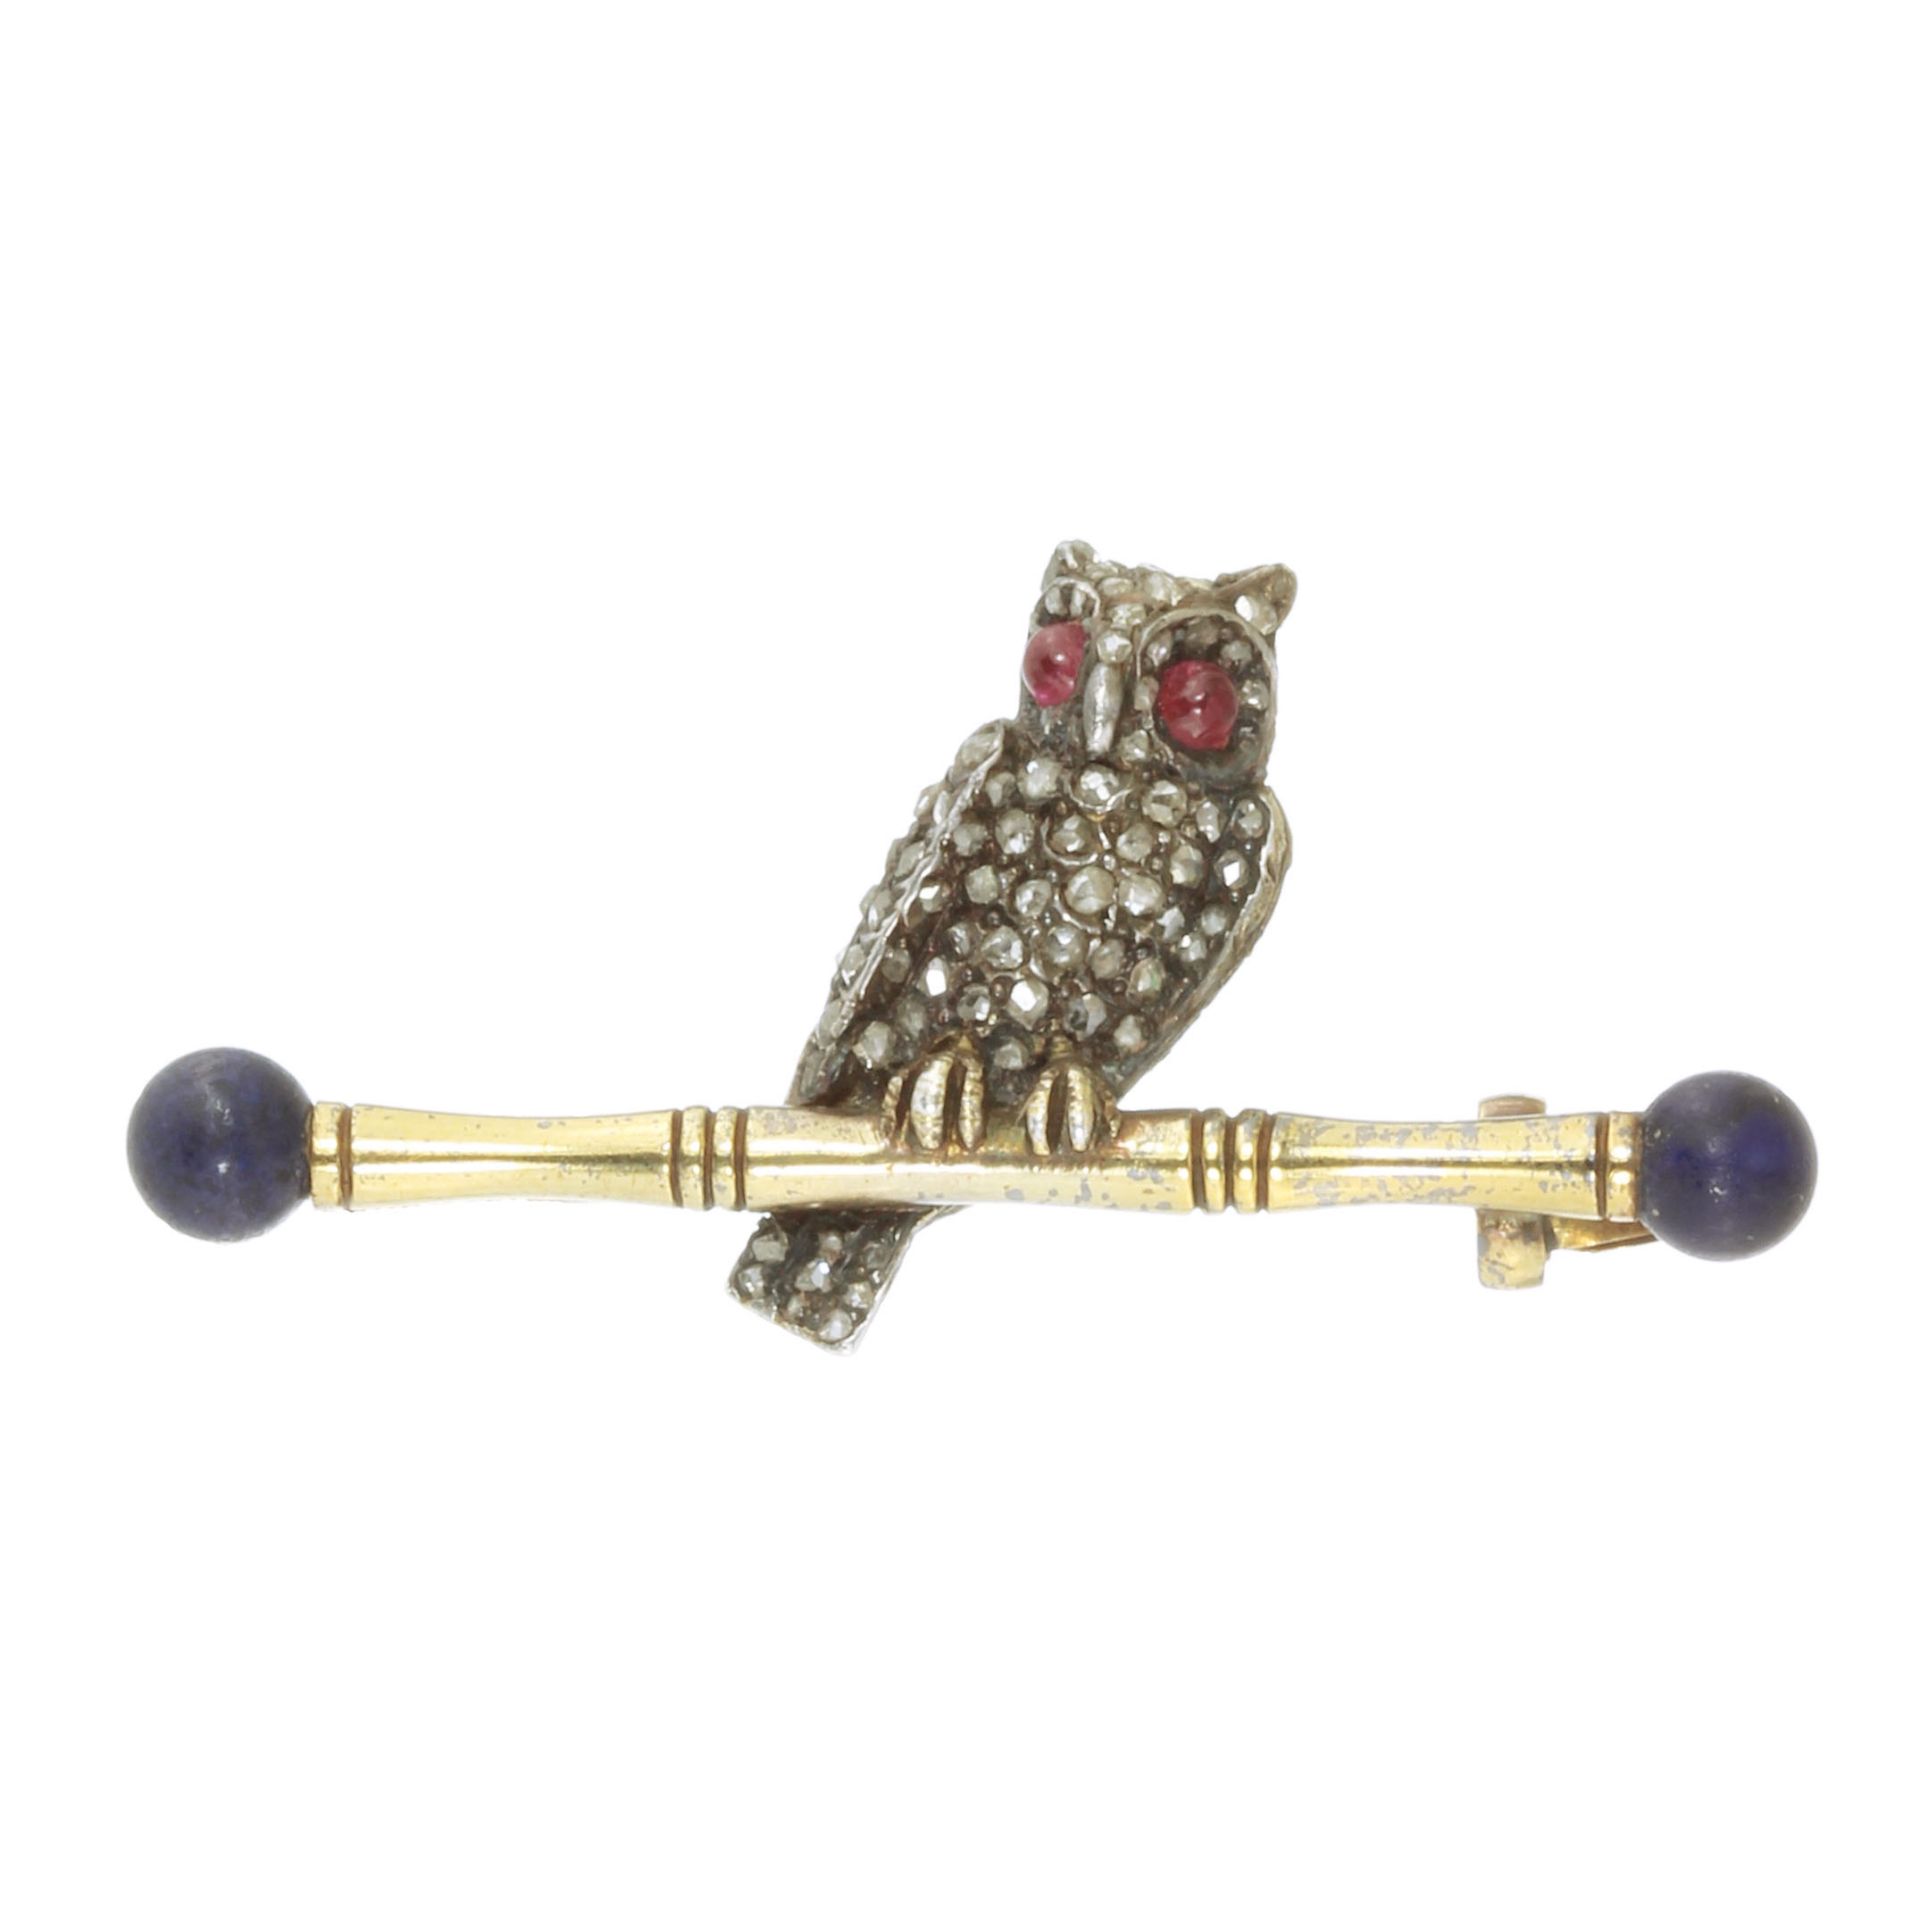 A DIAMOND, RUBY AND LAPIS LAZULI OWL BROOCH in yellow gold and silver, designed as an owl, its